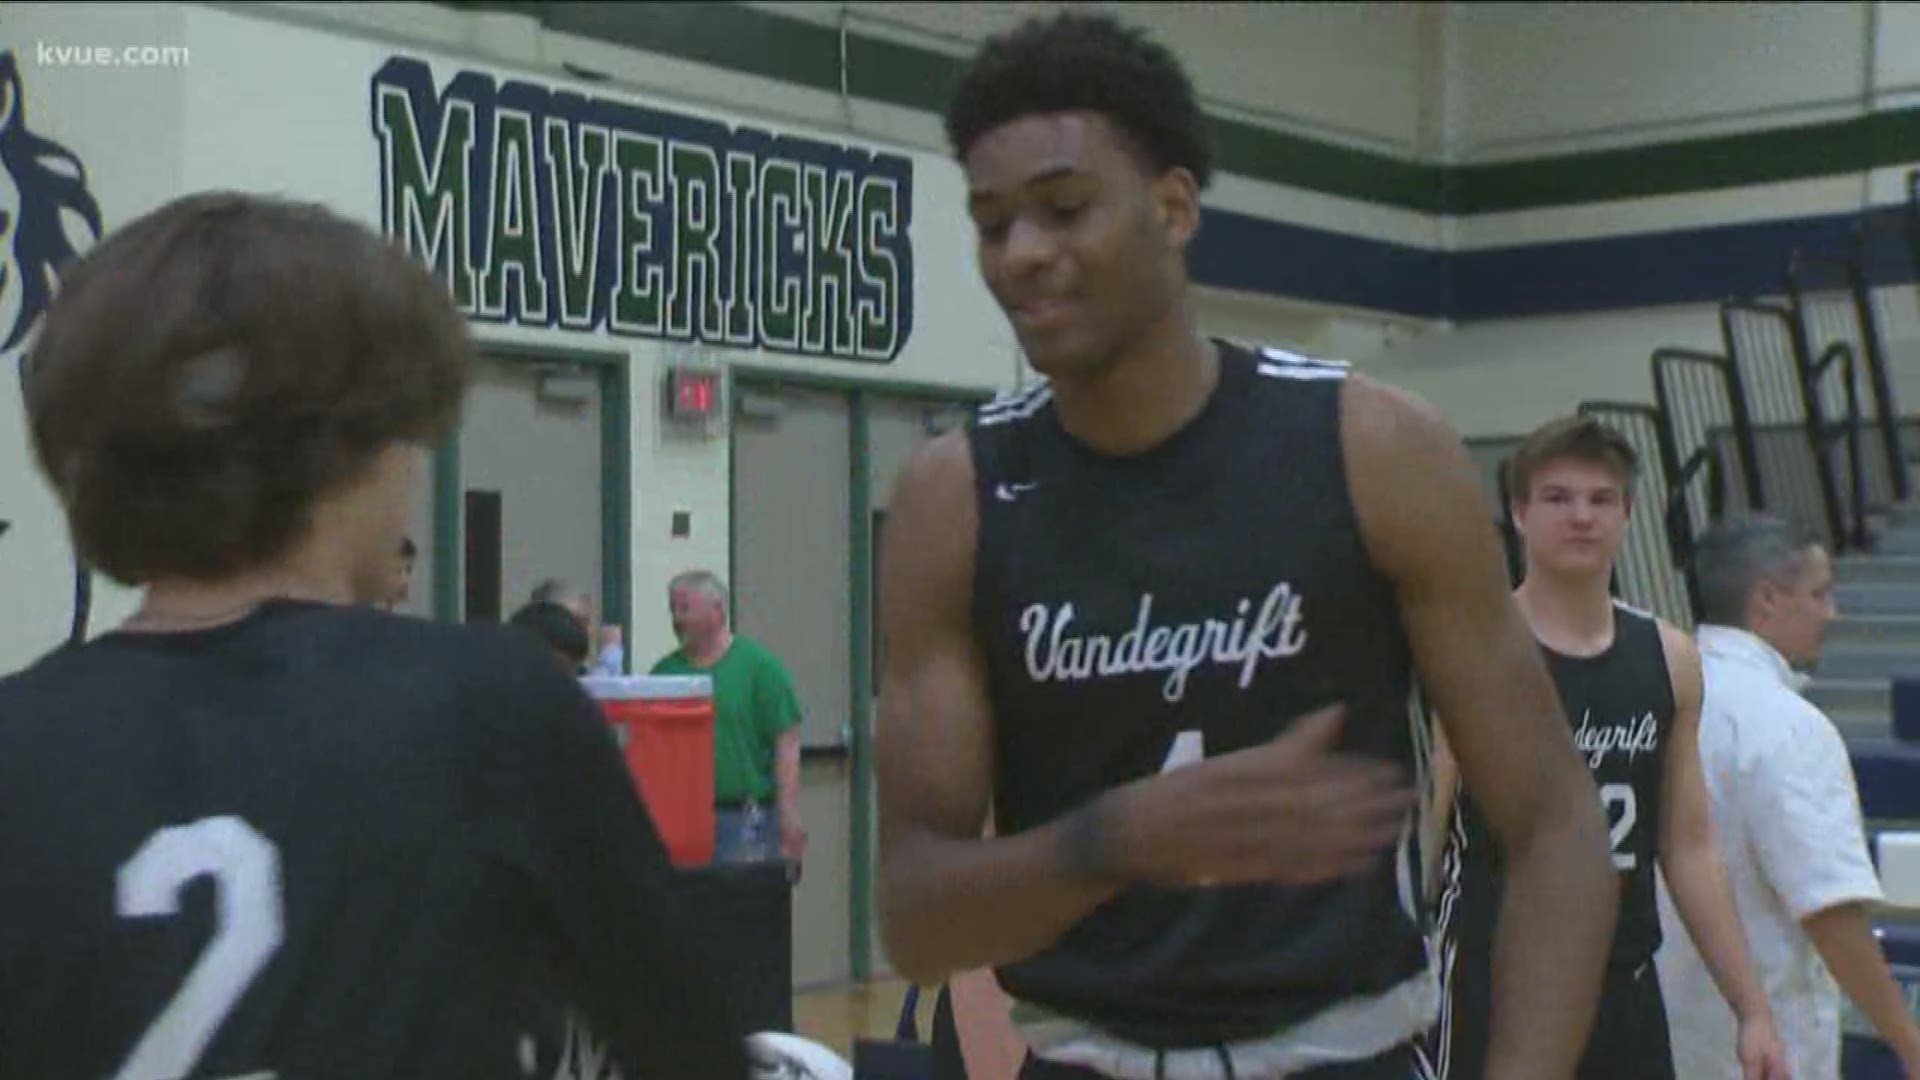 ESPN's ninth ranked player in the 2020 class, Vandegrift's Greg Brown, took on the McNeil Mavericks in a Austin-area matchup on the hardwood.